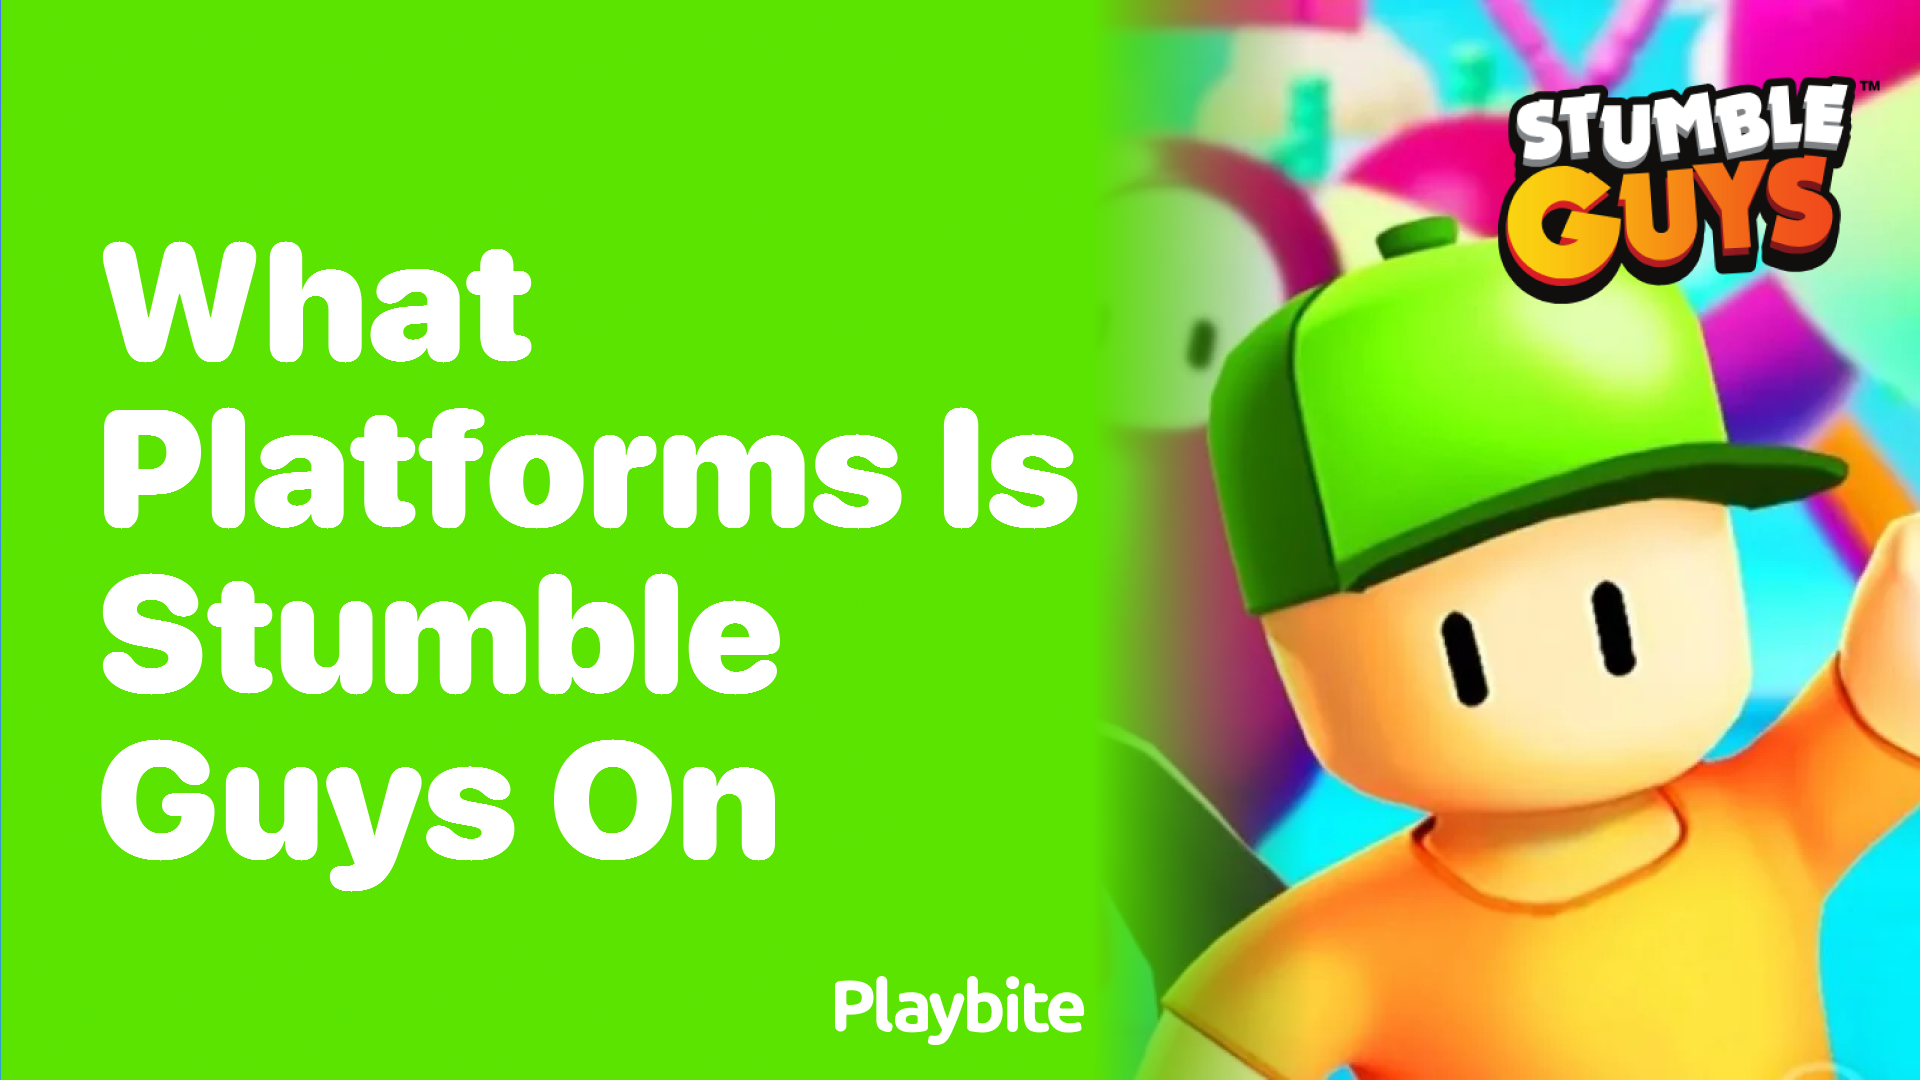 What Platforms Can You Play Stumble Guys On?